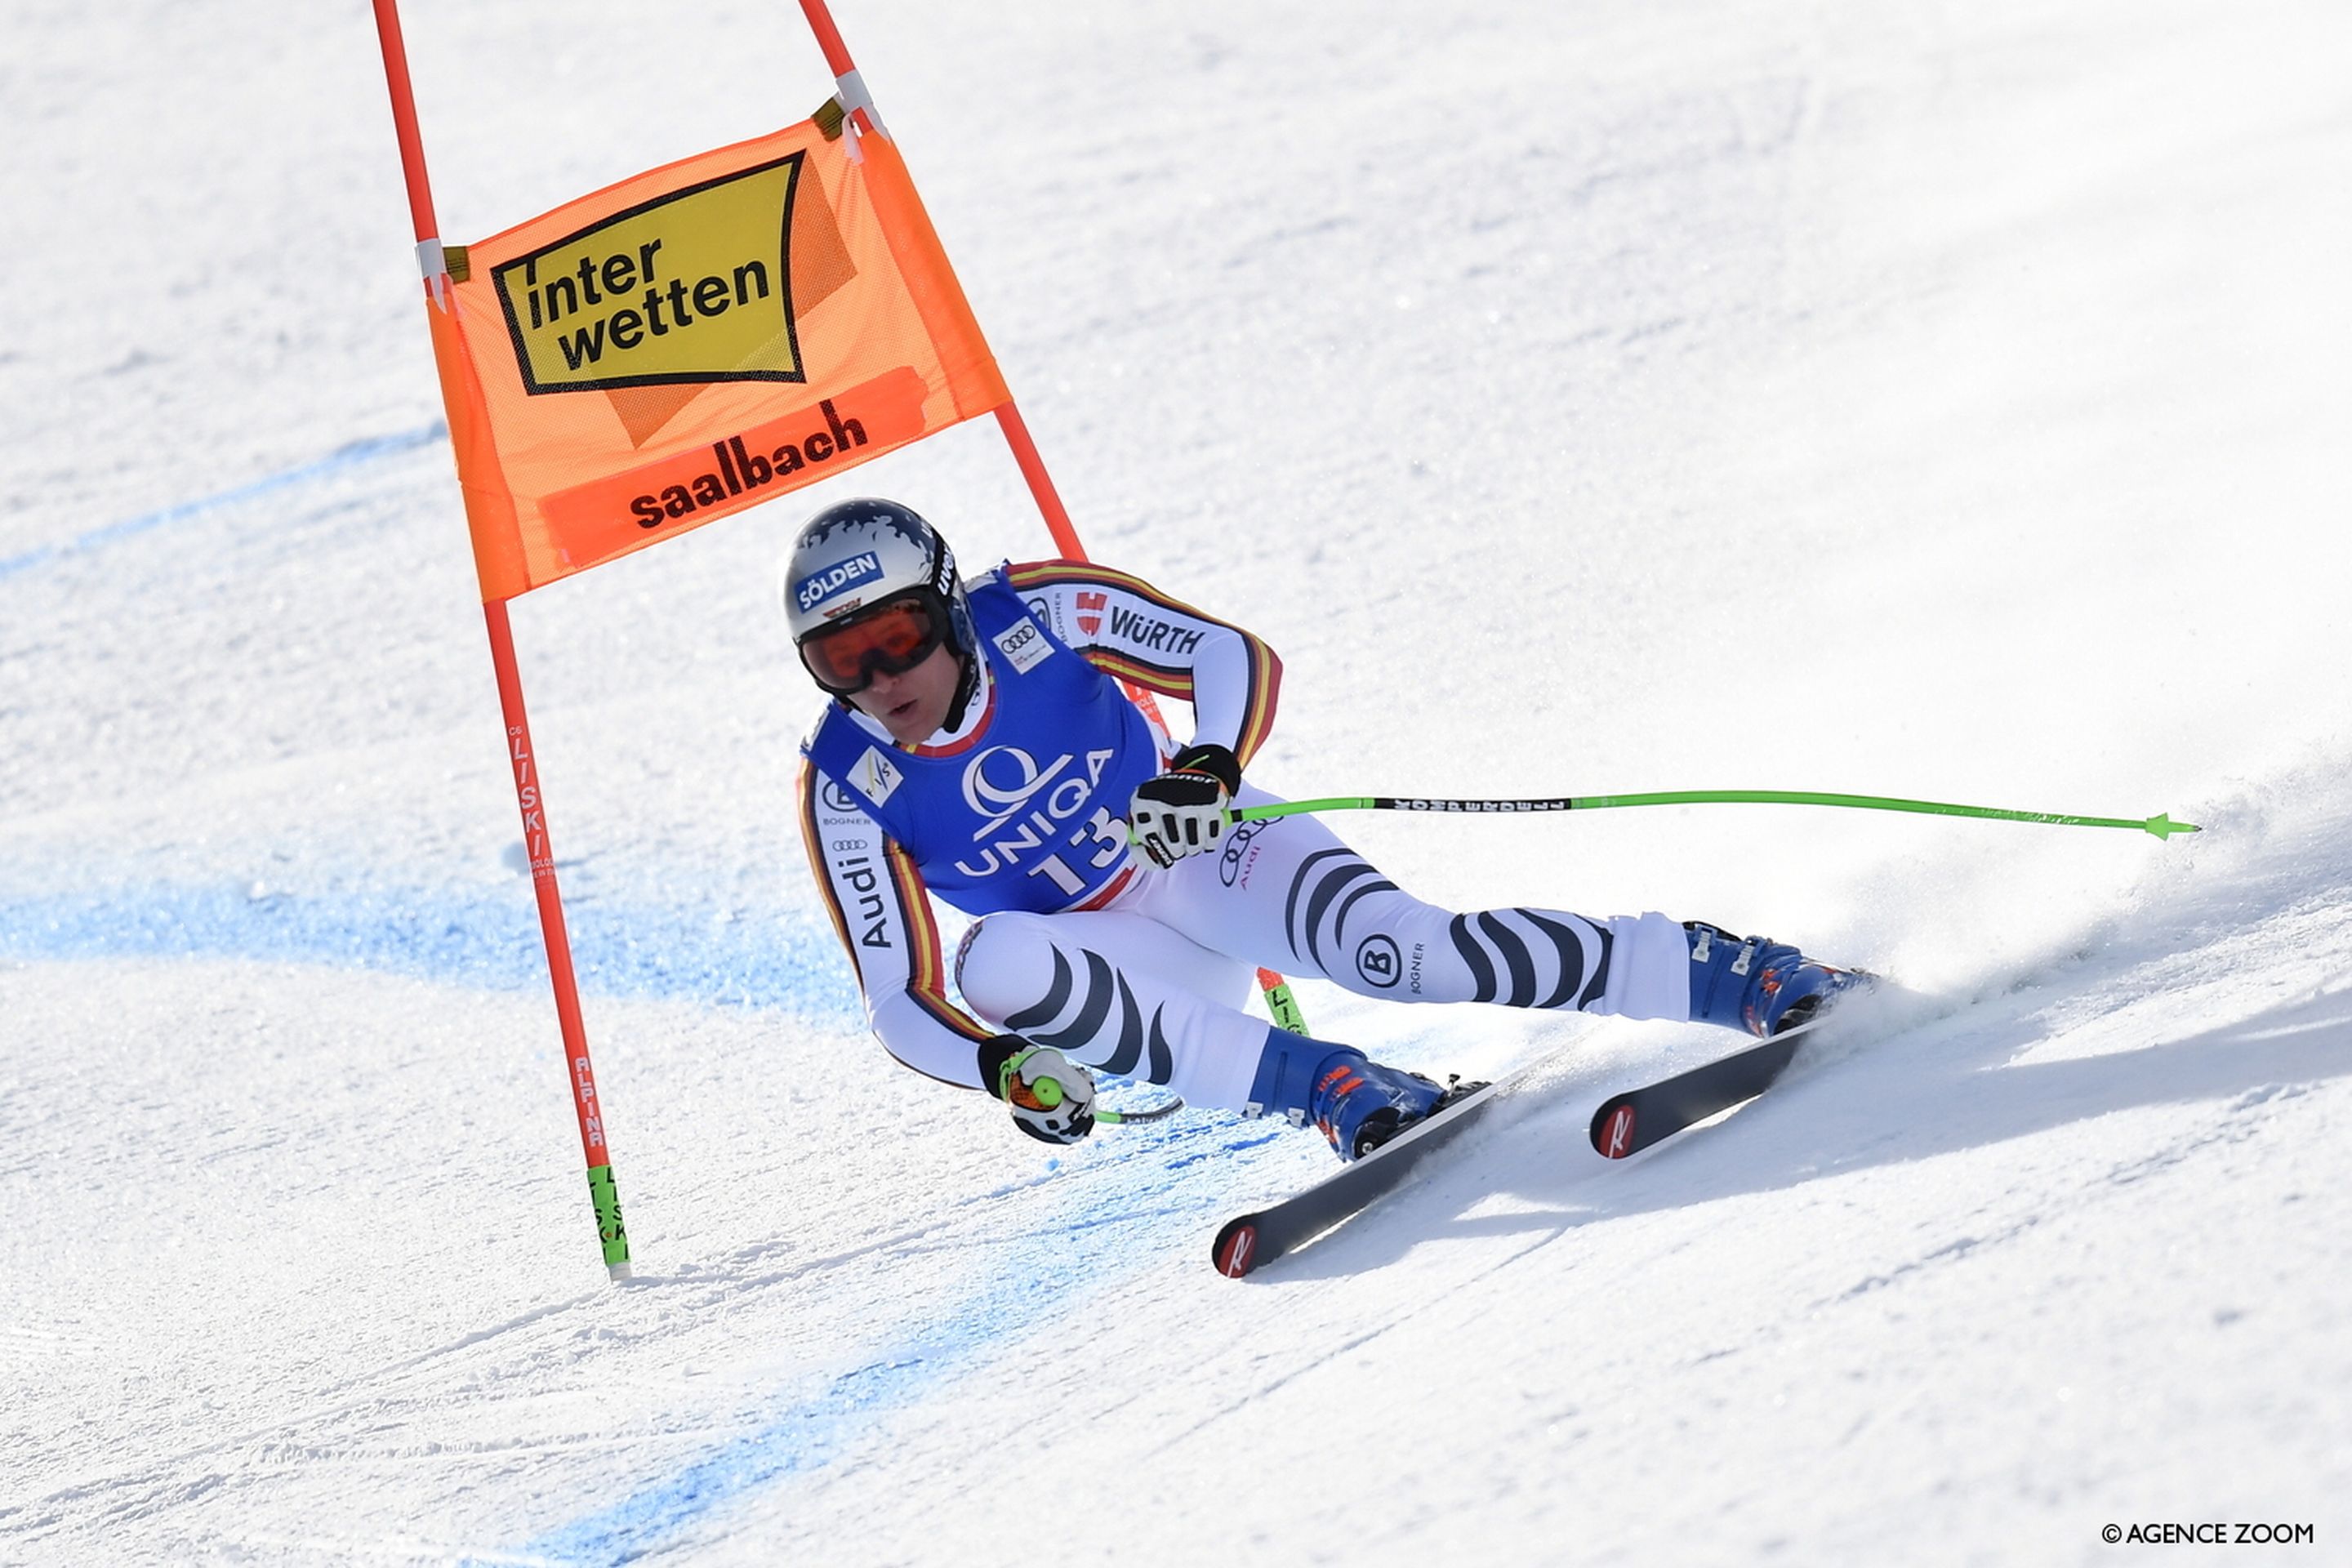 SAALBACH, AUSTRIA - FEBRUARY 13 : Thomas Dressen of Germany in action during the Audi FIS Alpine Ski World Cup Men's Downhill on February 13, 2020 in Saalbach Austria. (Photo by Alain Grosclaude/Agence Zoom)